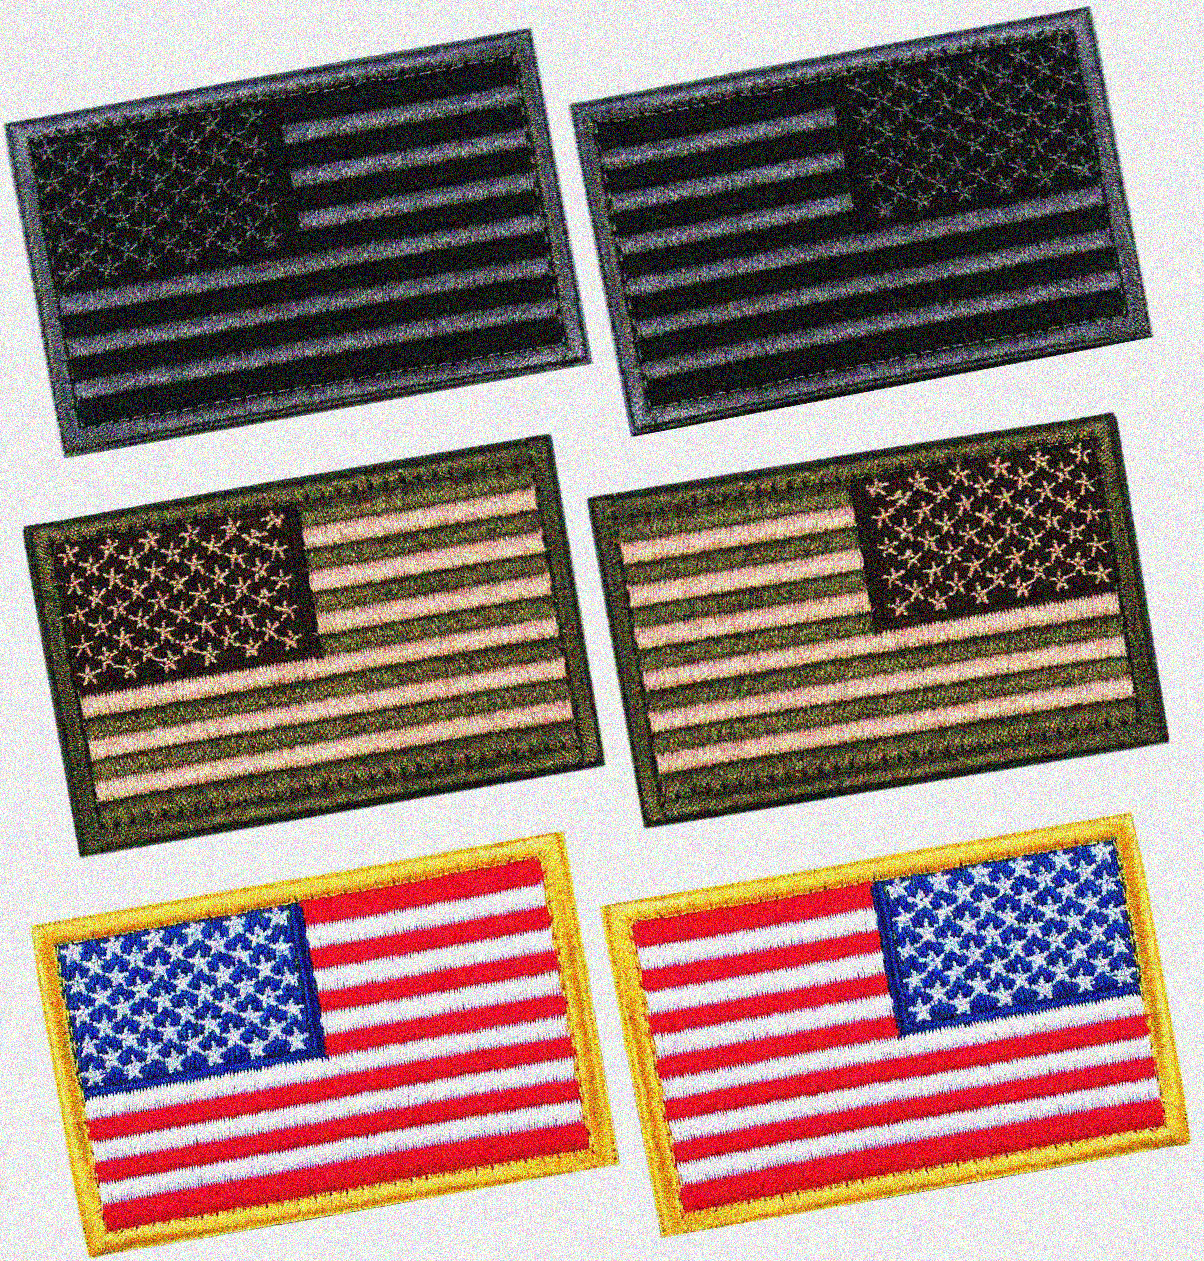 What is a tactical American flag?